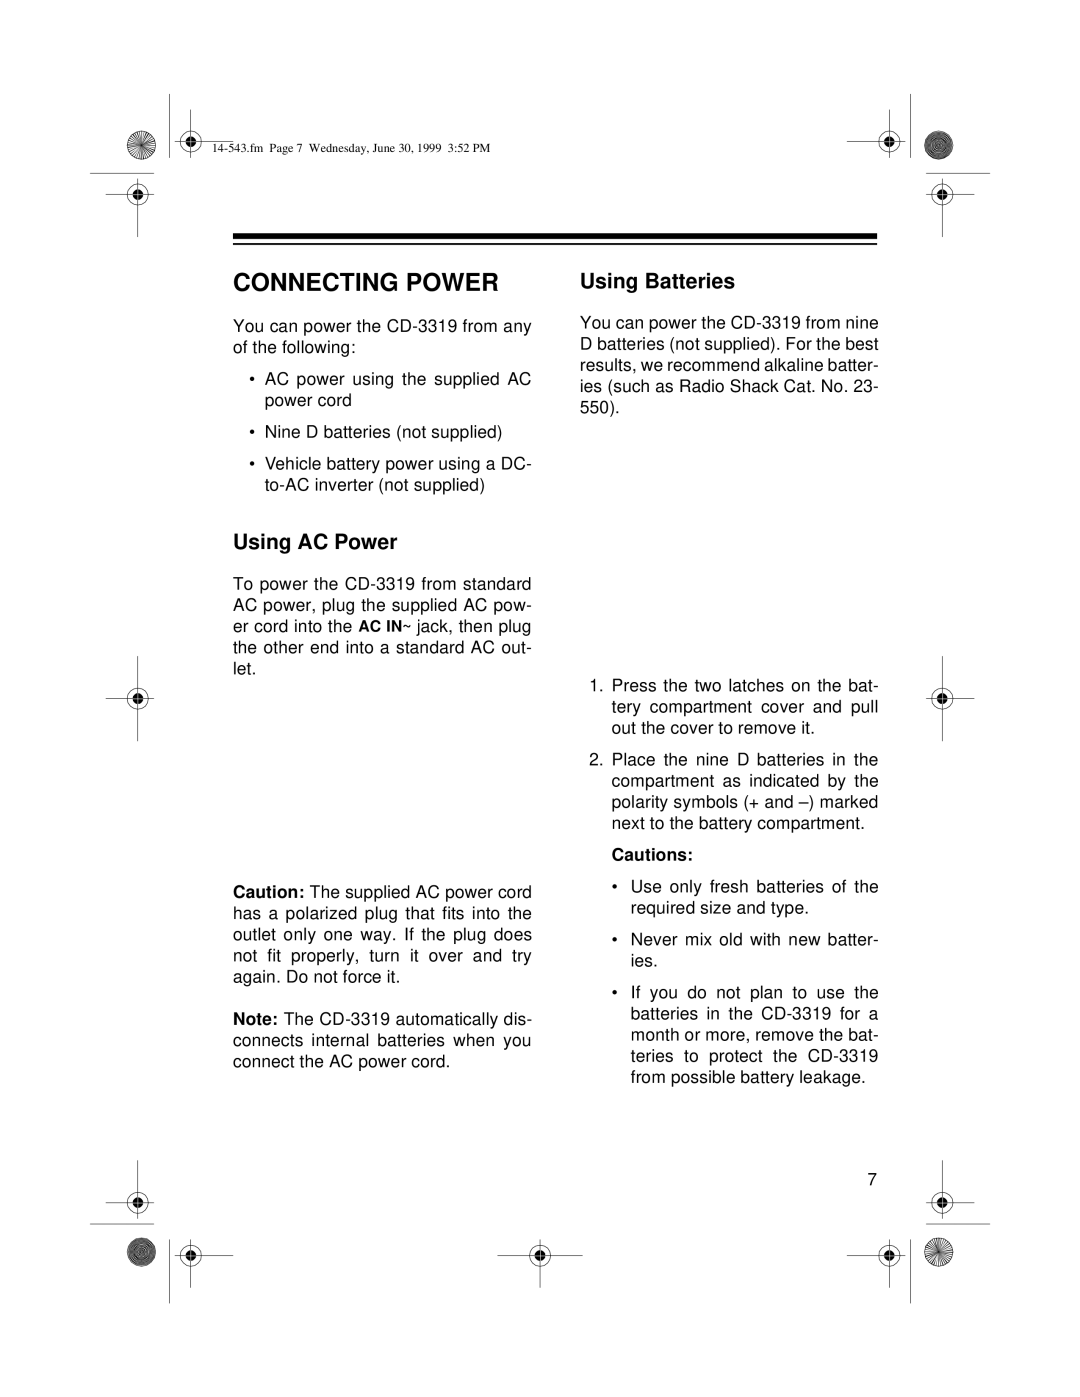 Radio Shack CD-3319 owner manual Connecting Power, Using AC Power, Using Batteries 